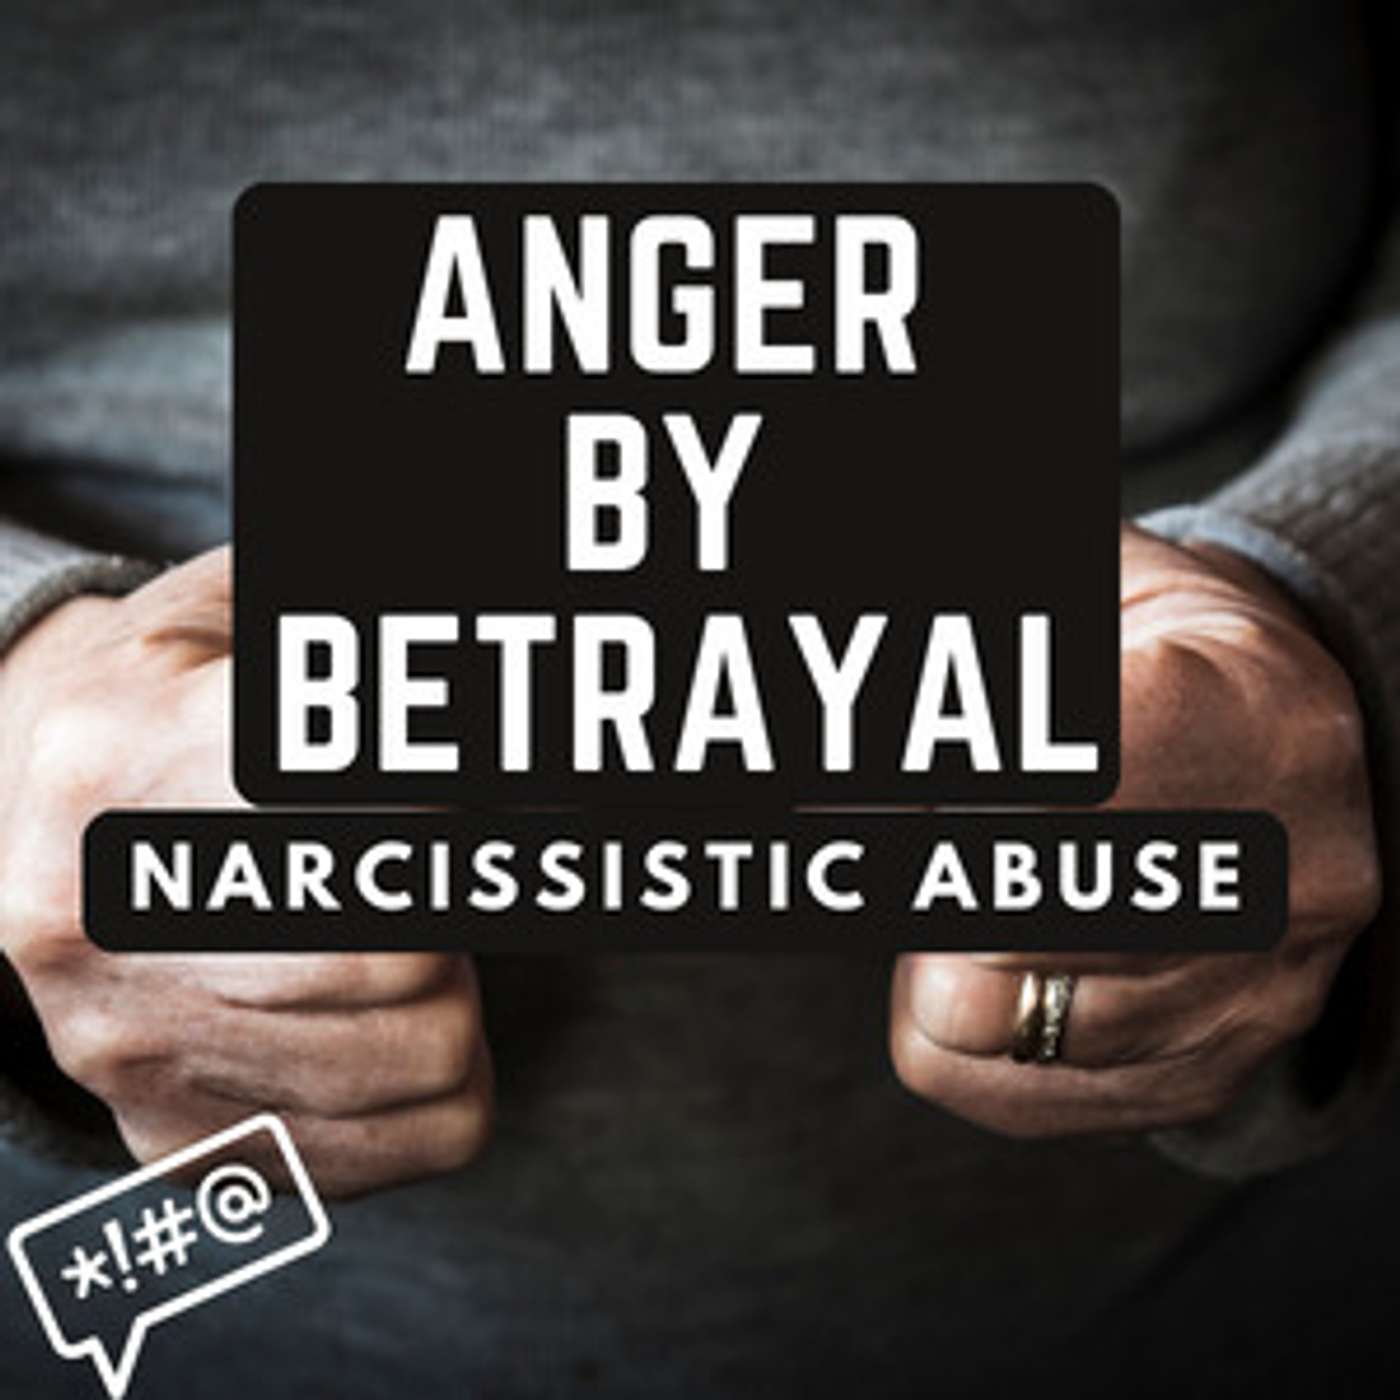 Anger By Betrayal: Sources of Anger after Enduring Narcissistic Abuse Trauma